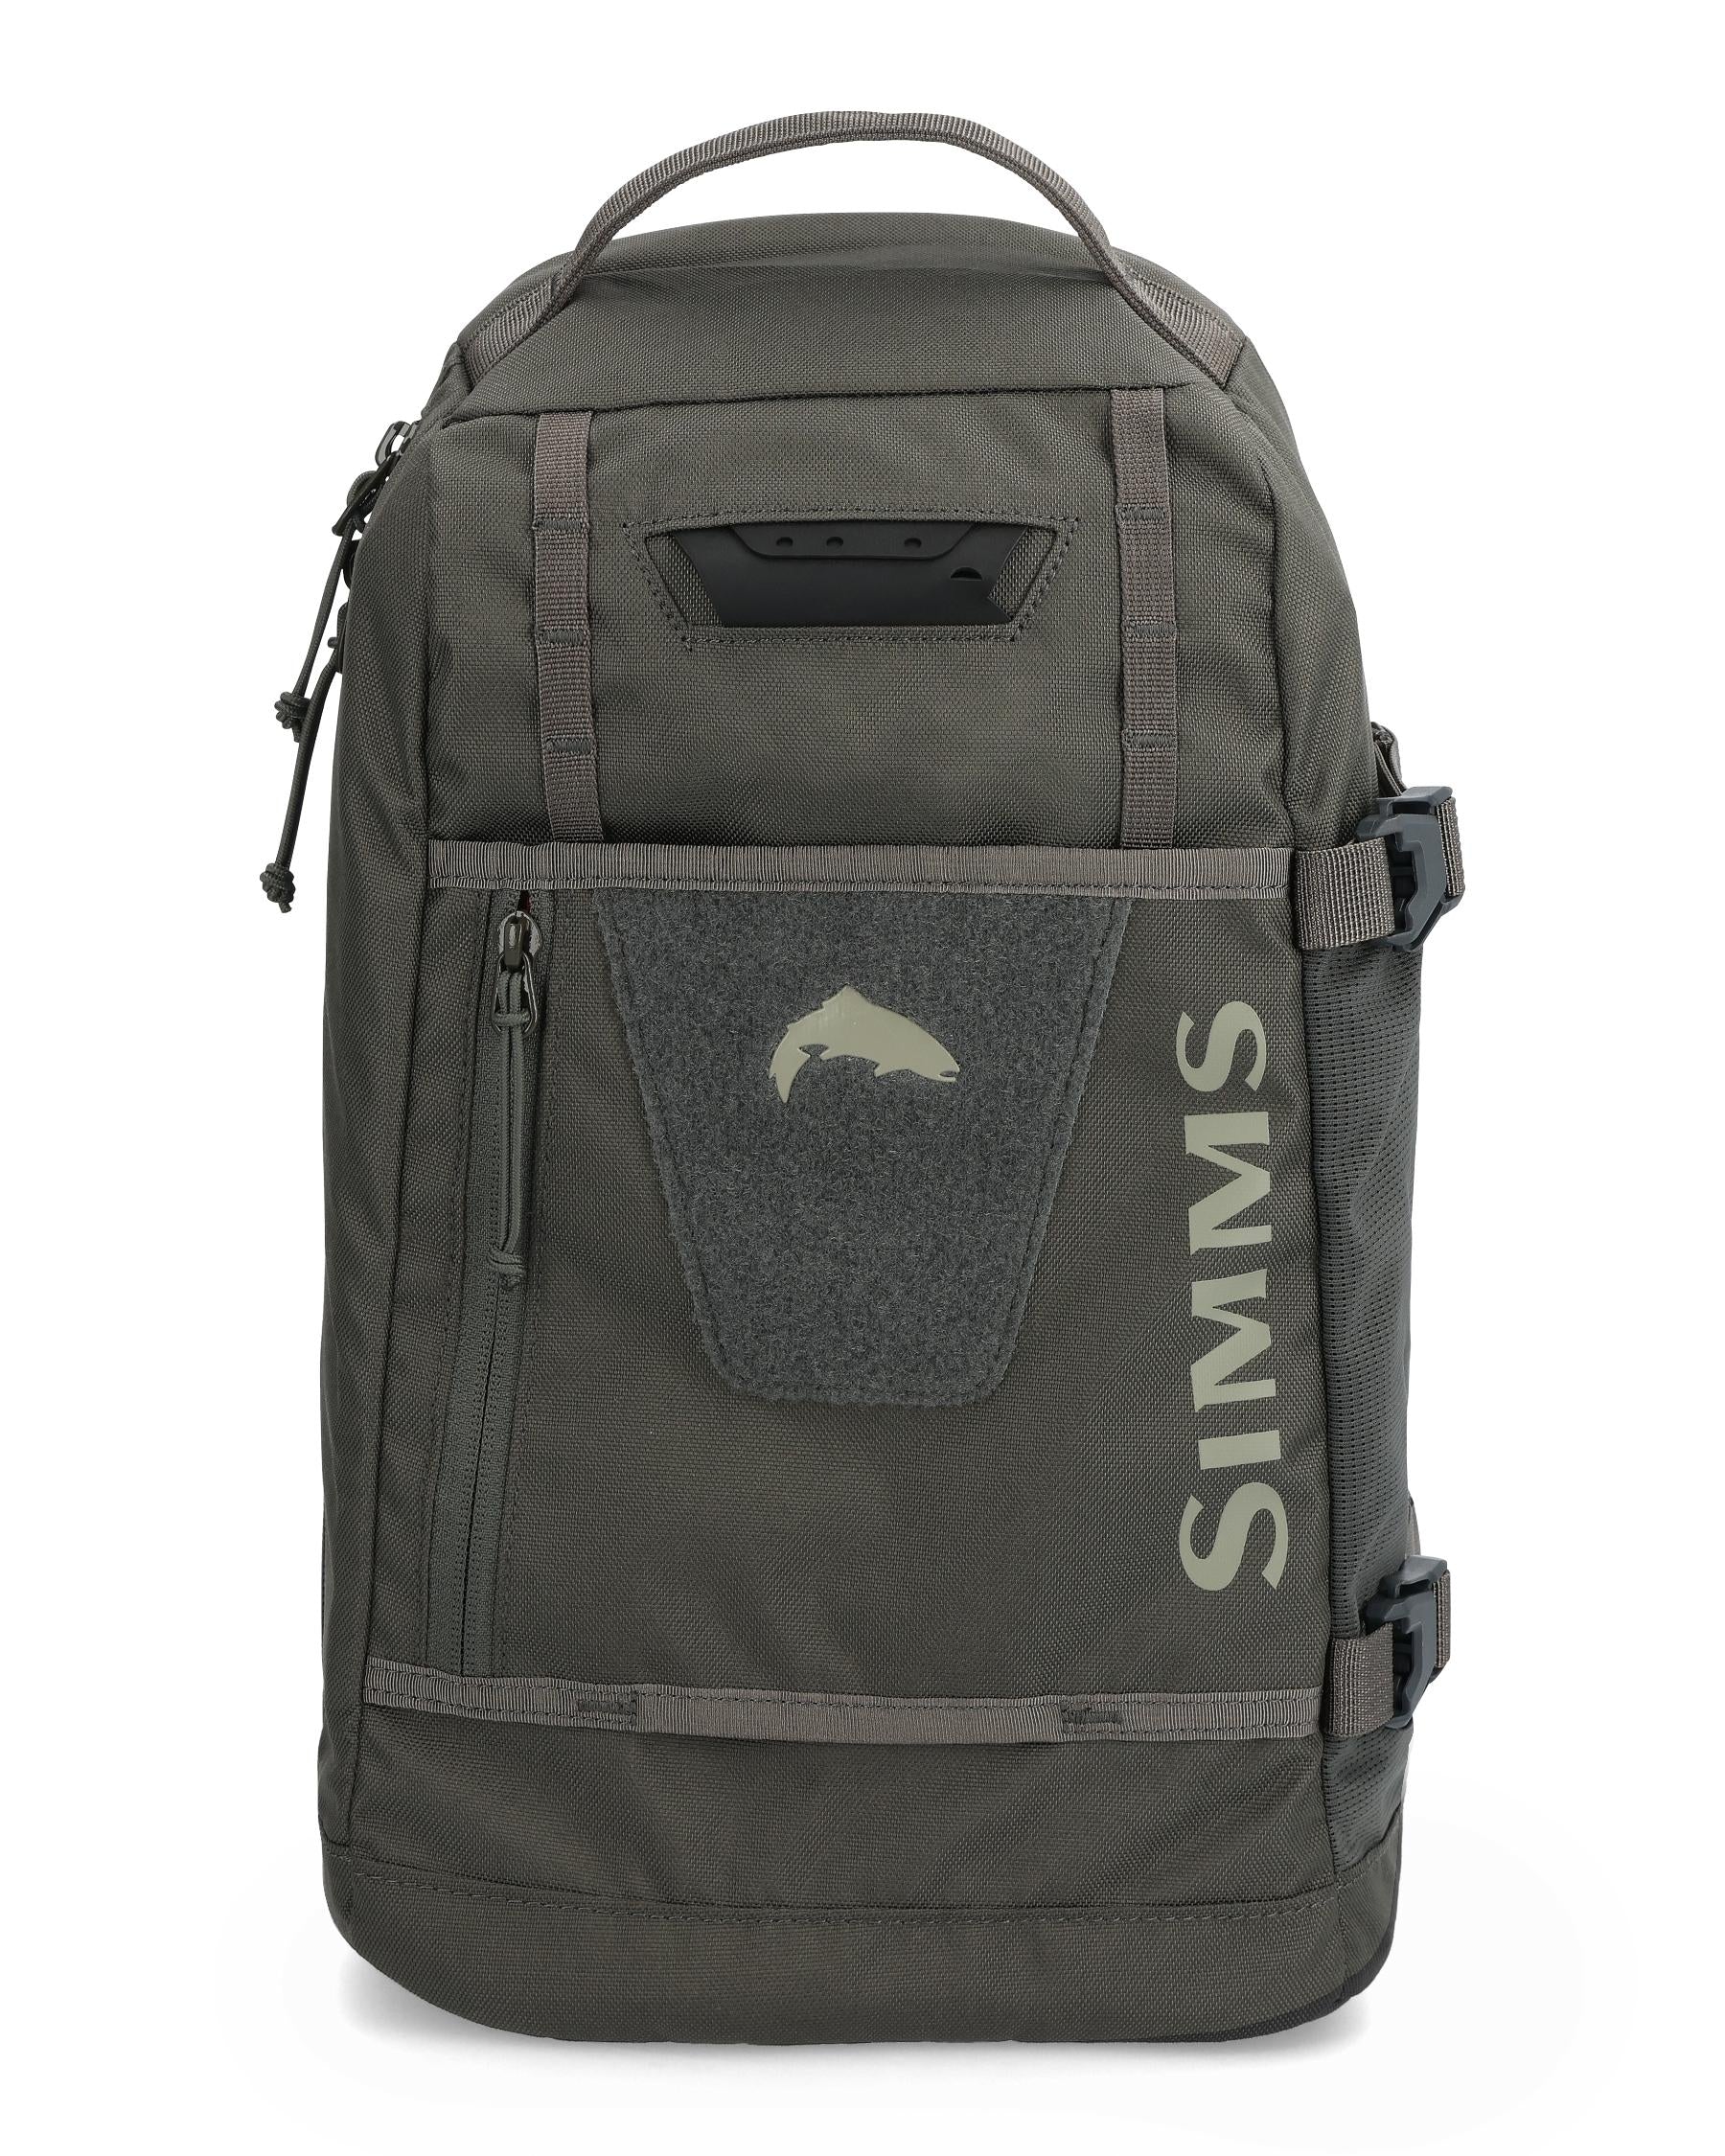 Fly Fishing Addicts: User Forum • View topic - Patagonia Sling Pack